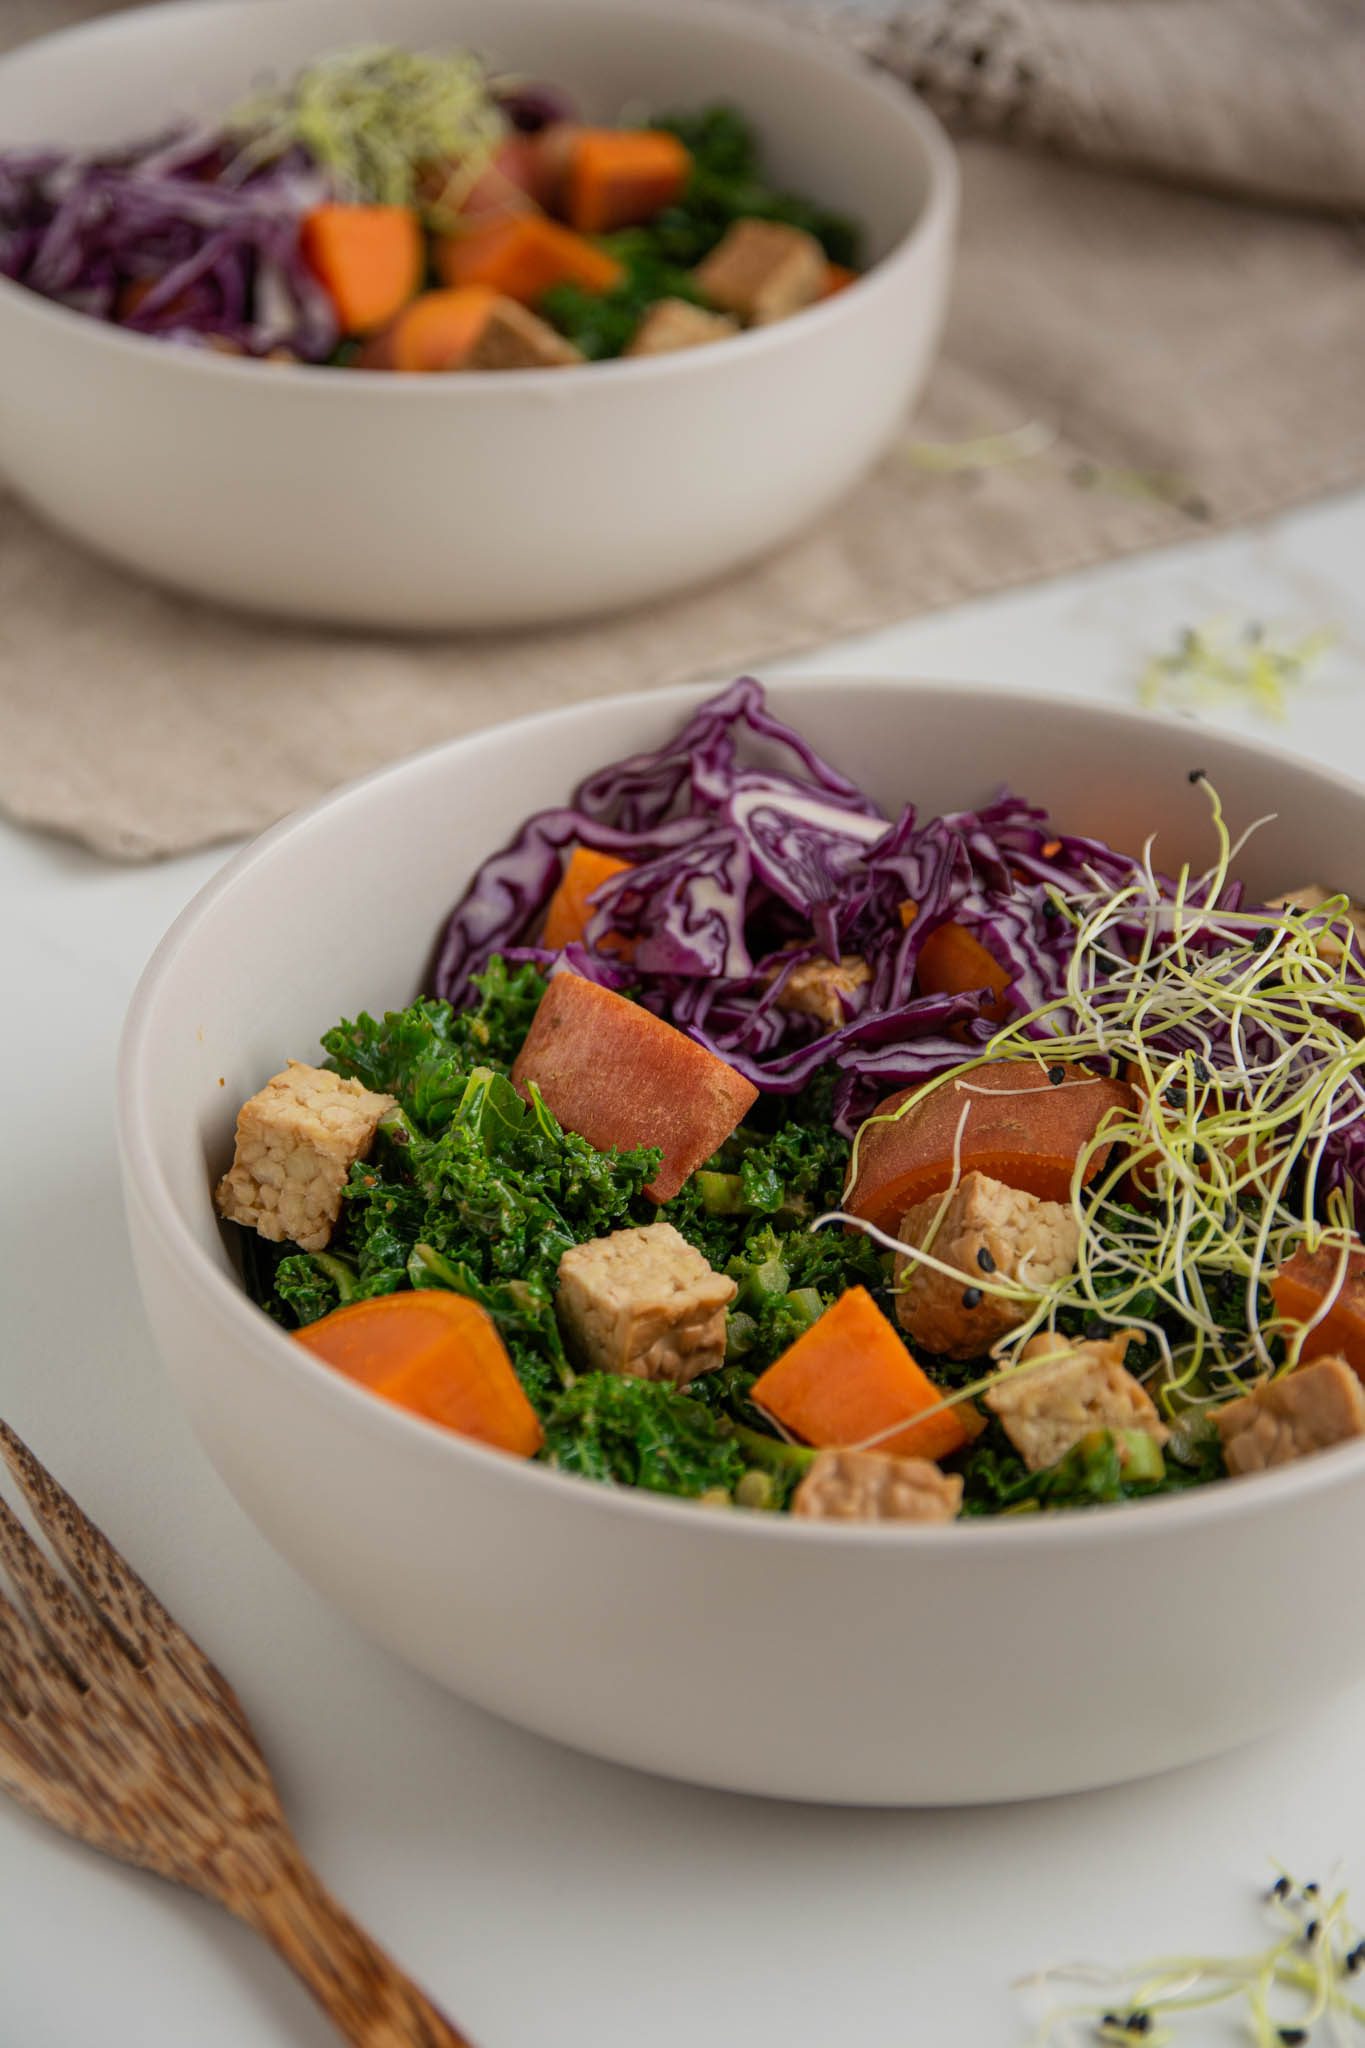 Any fan of kale will enjoy this healthy and delicious massaged kale salad that is ready in under 30 minutes. Steamed and massaged kale paired with sweet potatoes and tempeh makes a filling and nourishing plant-based meal. Using steamed kale for greater antioxidant capacity.